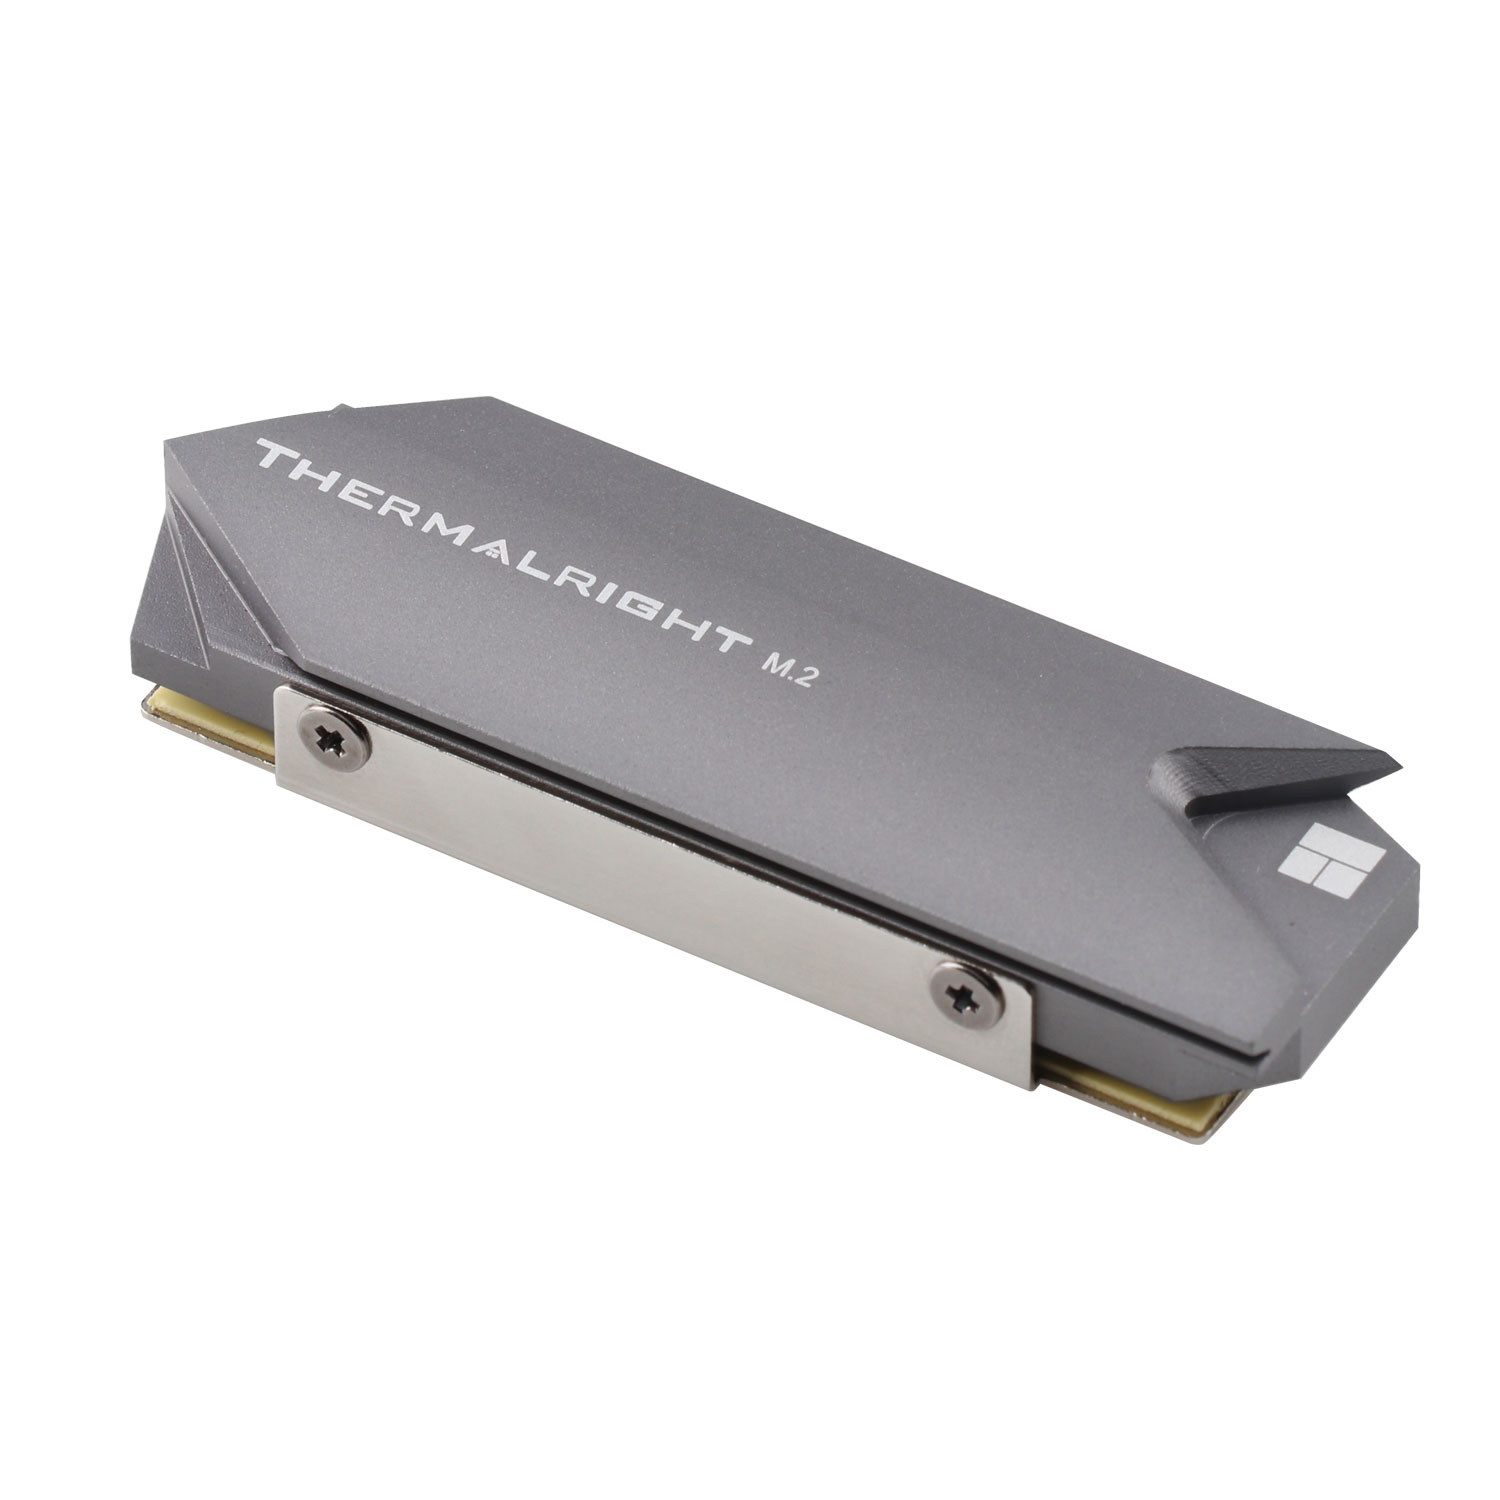 M.2 2280 SSD – Thermalright